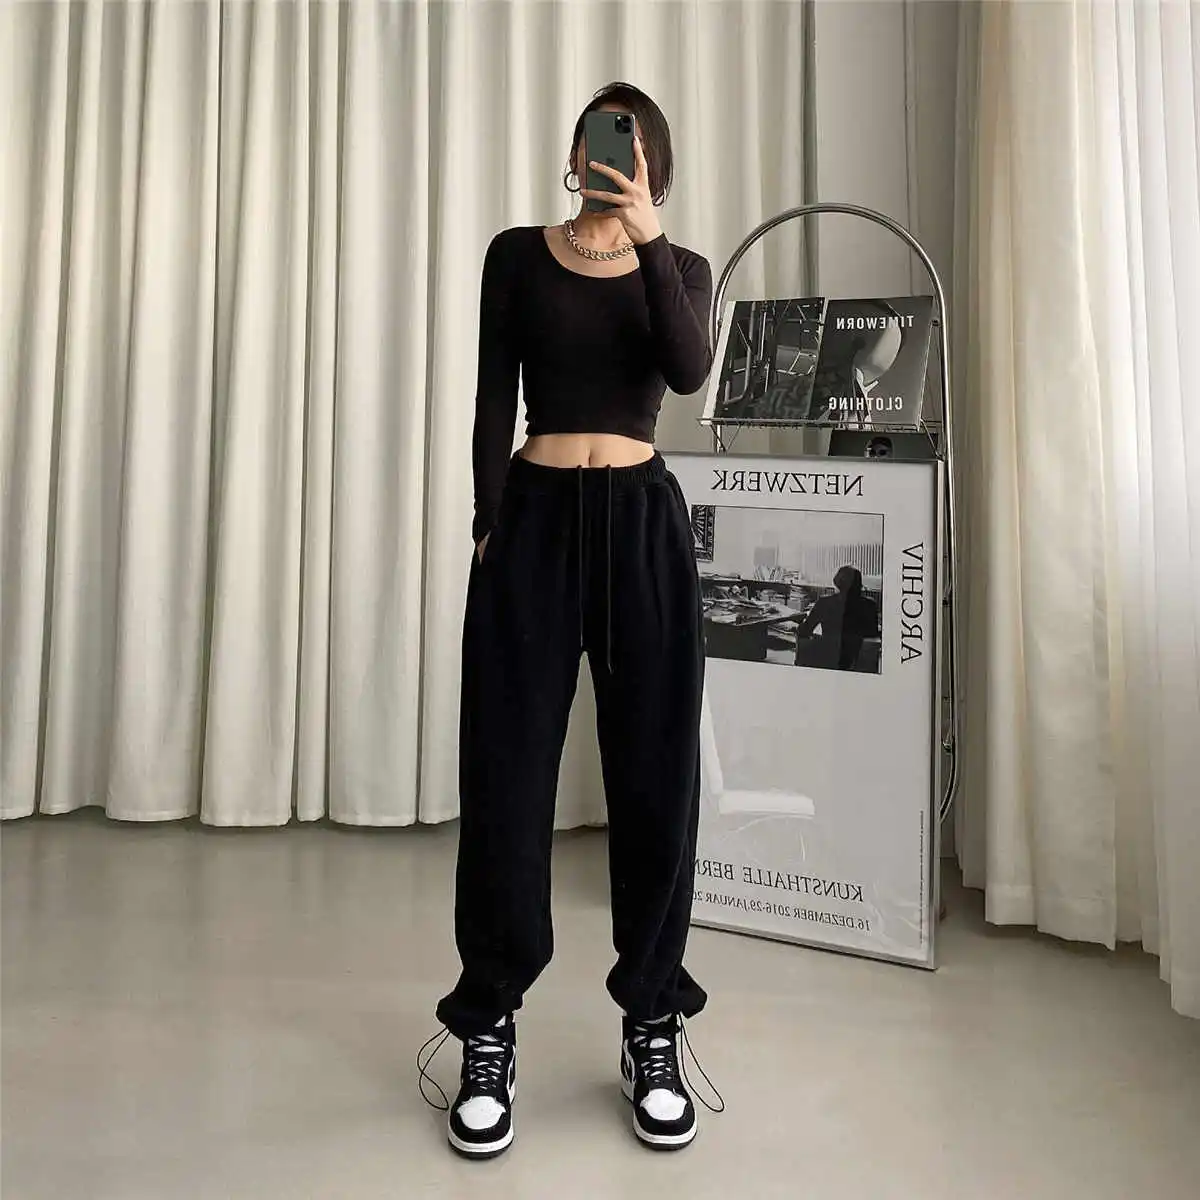 High Waist Black Jogging Sweatpants For Women Baggy Sports Pants With Gray  Accents Casual Female Jogger Trousers Women For Joggers And Jogs Y211115  From Mengyang02, $10.07